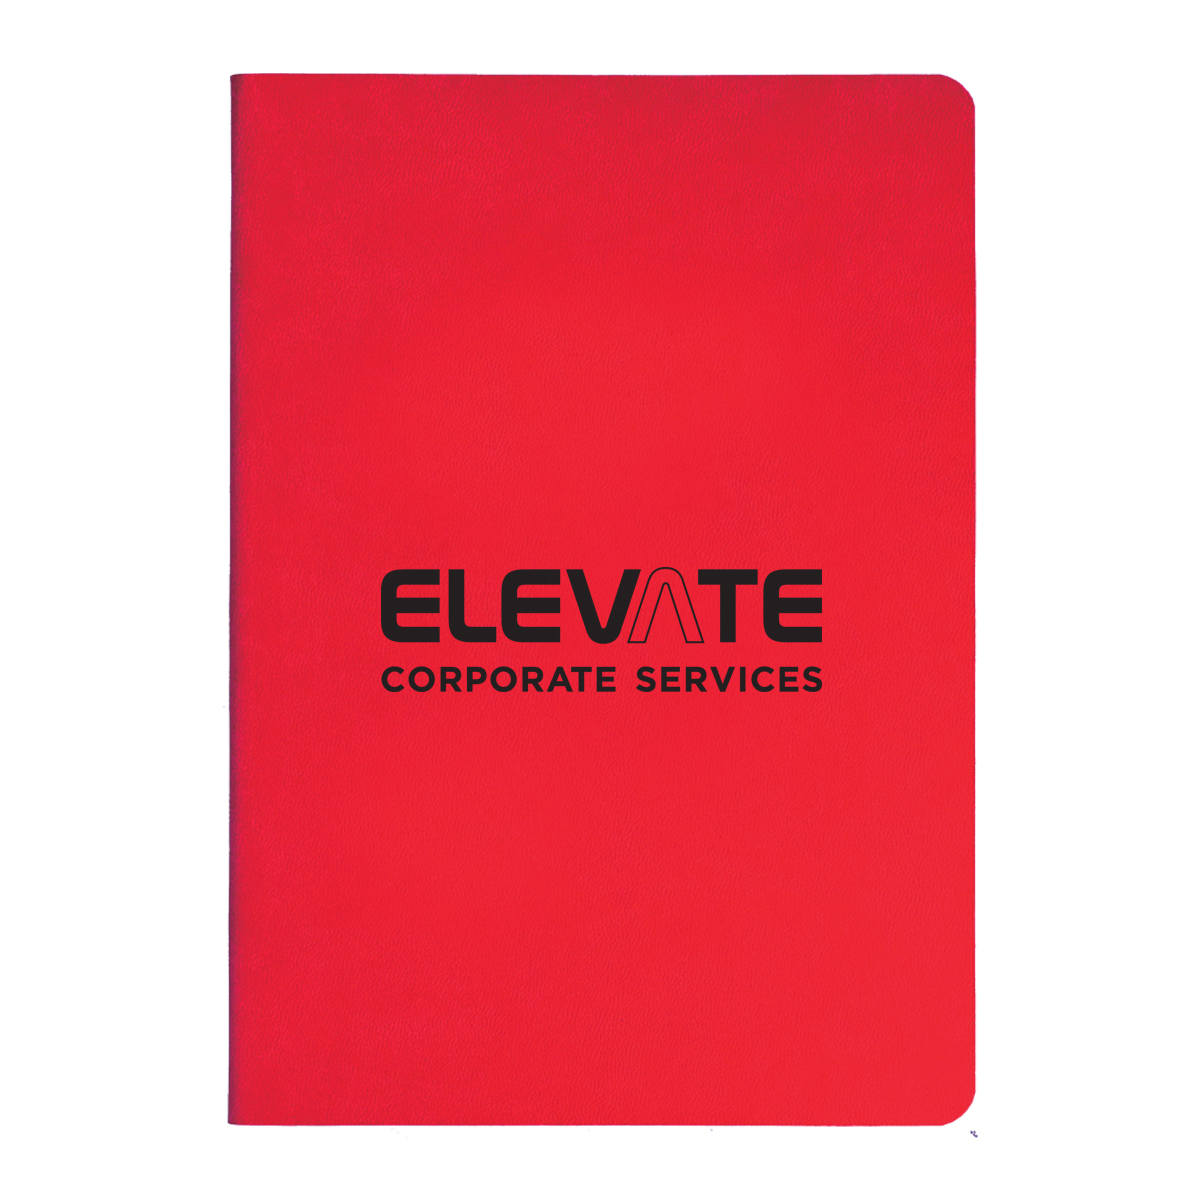 elevate branding ideas available